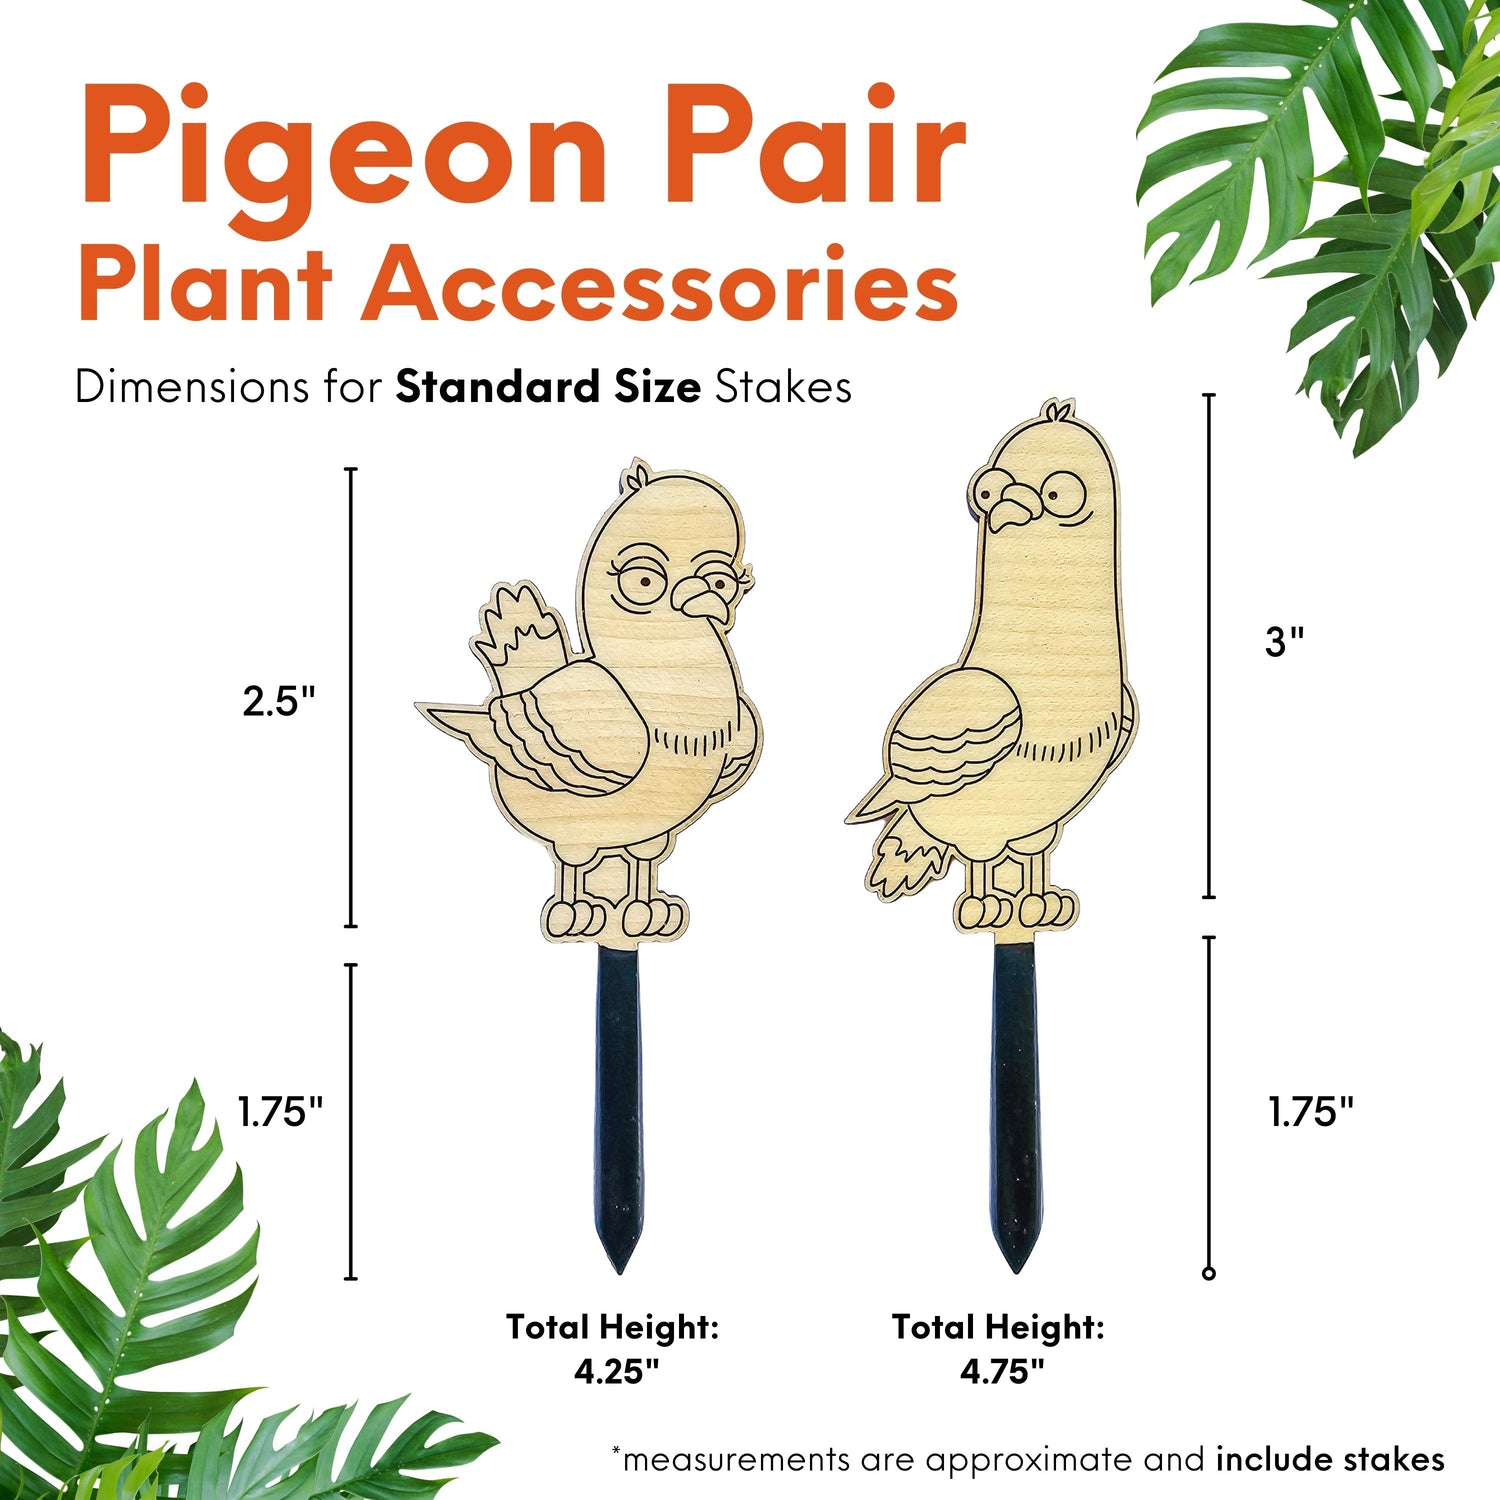 Indoor plant accessory - pair of pigeon birds engraved in wooden houseplant stake decorations.